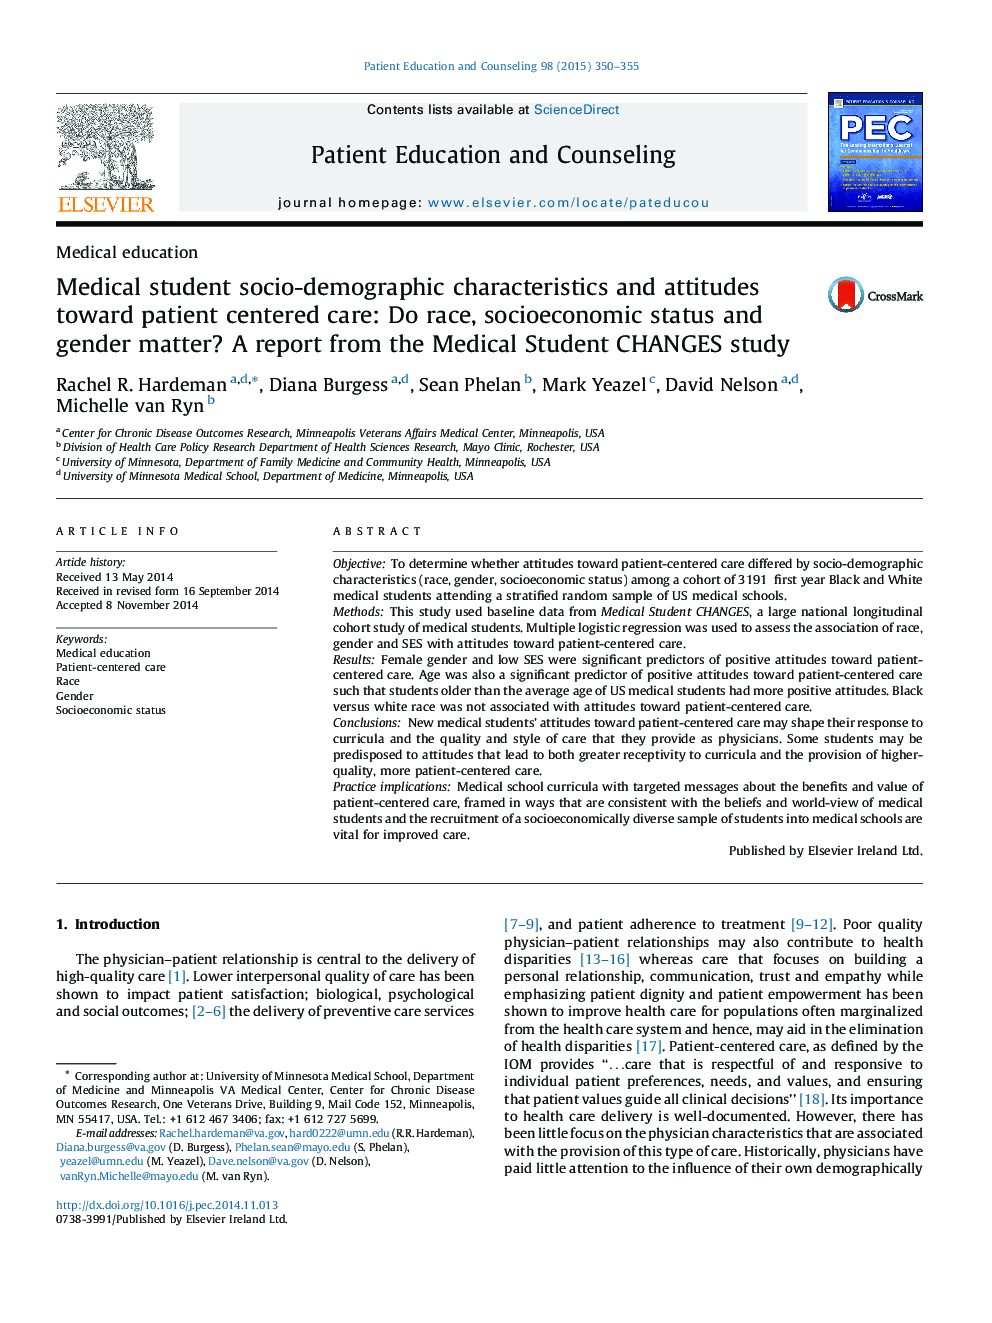 Medical student socio-demographic characteristics and attitudes toward patient centered care: Do race, socioeconomic status and gender matter? A report from the Medical Student CHANGES study